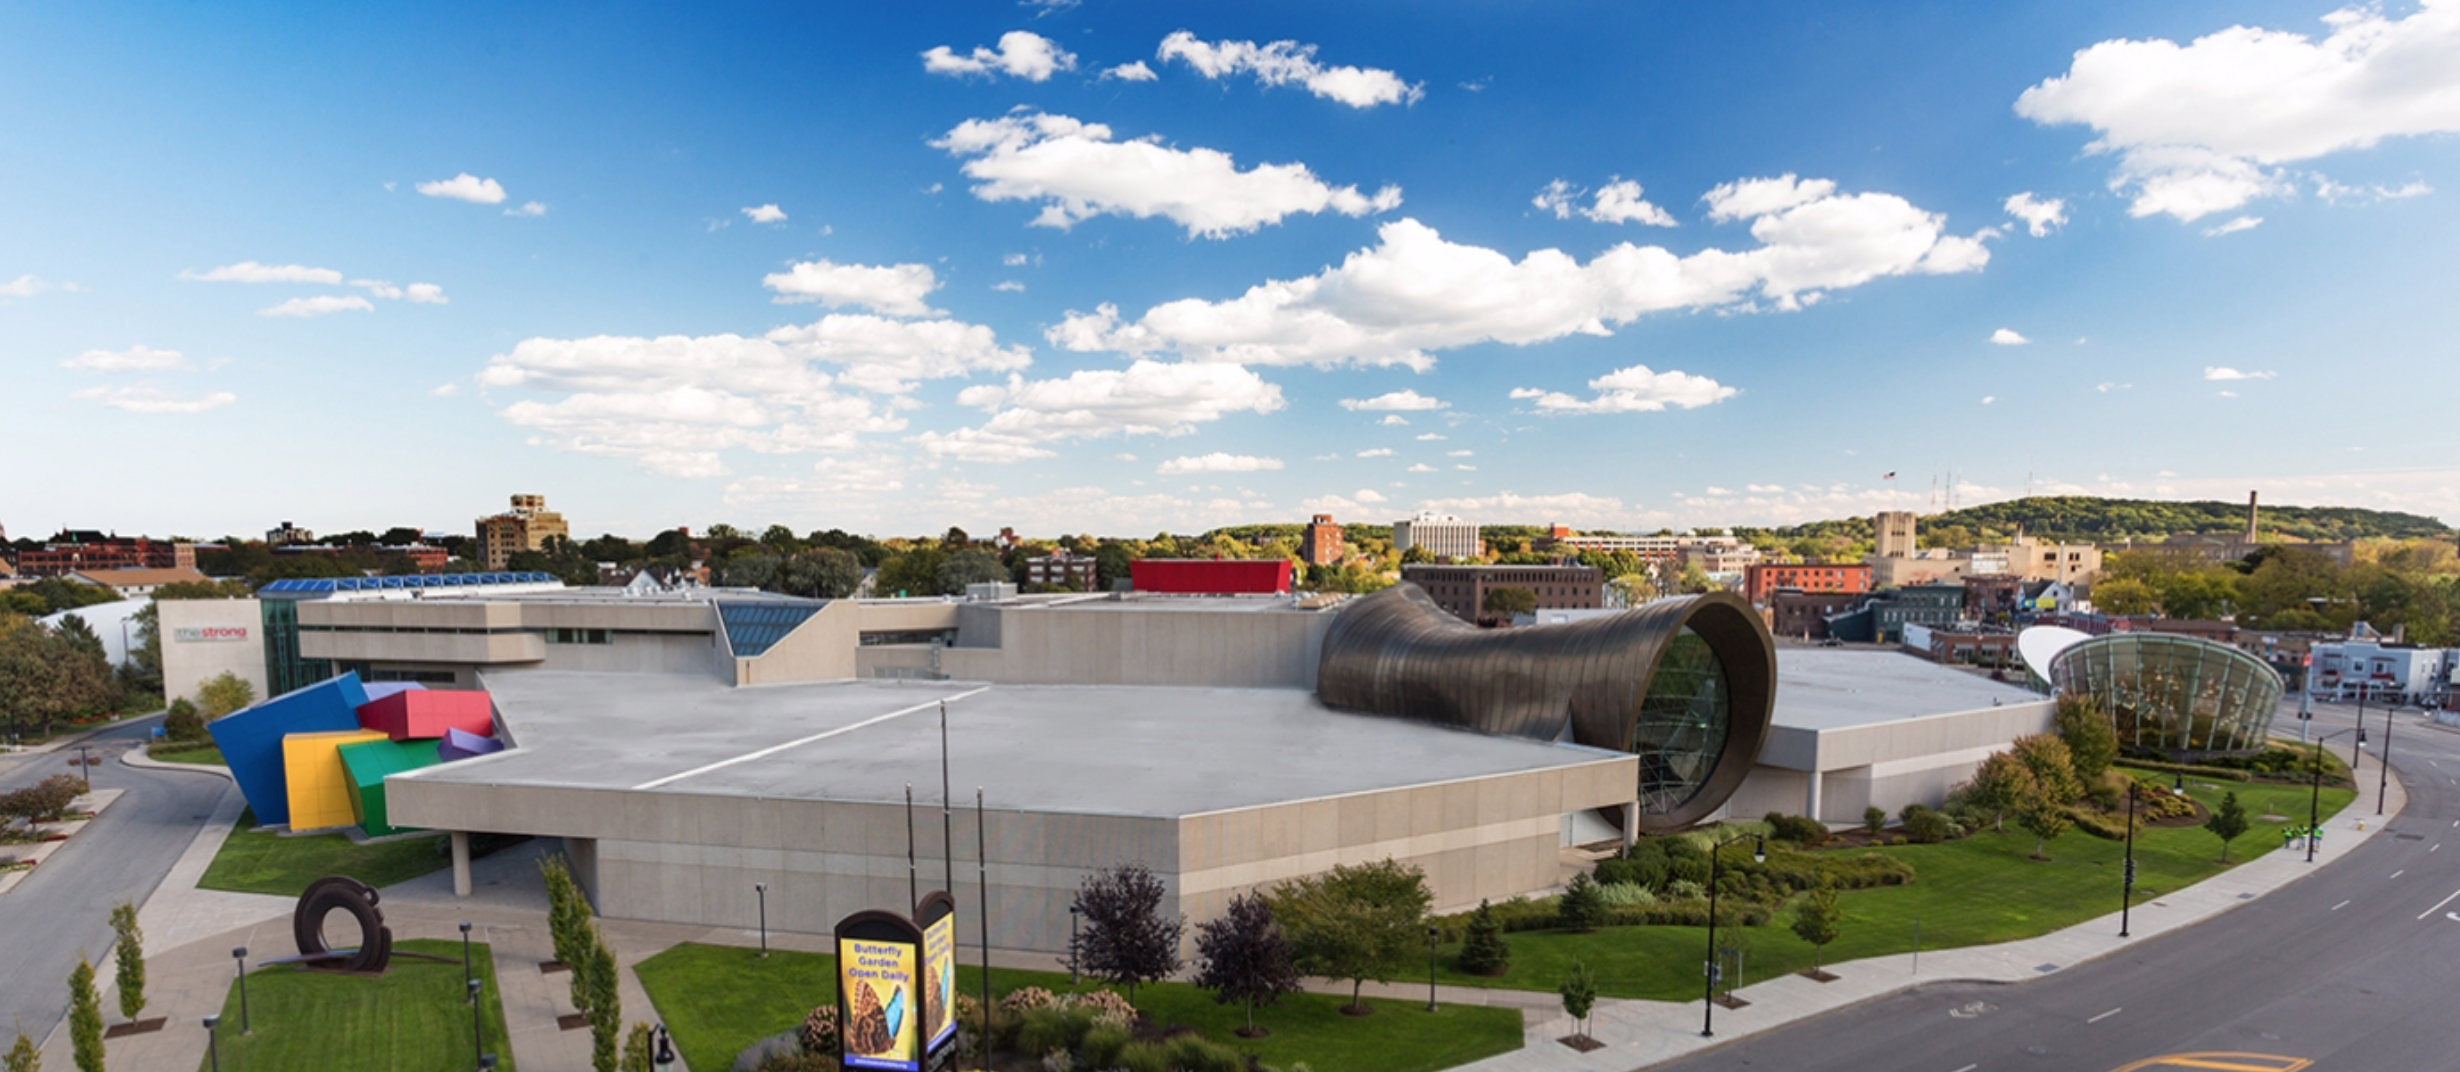 National Museum of Play in Rochester, NY